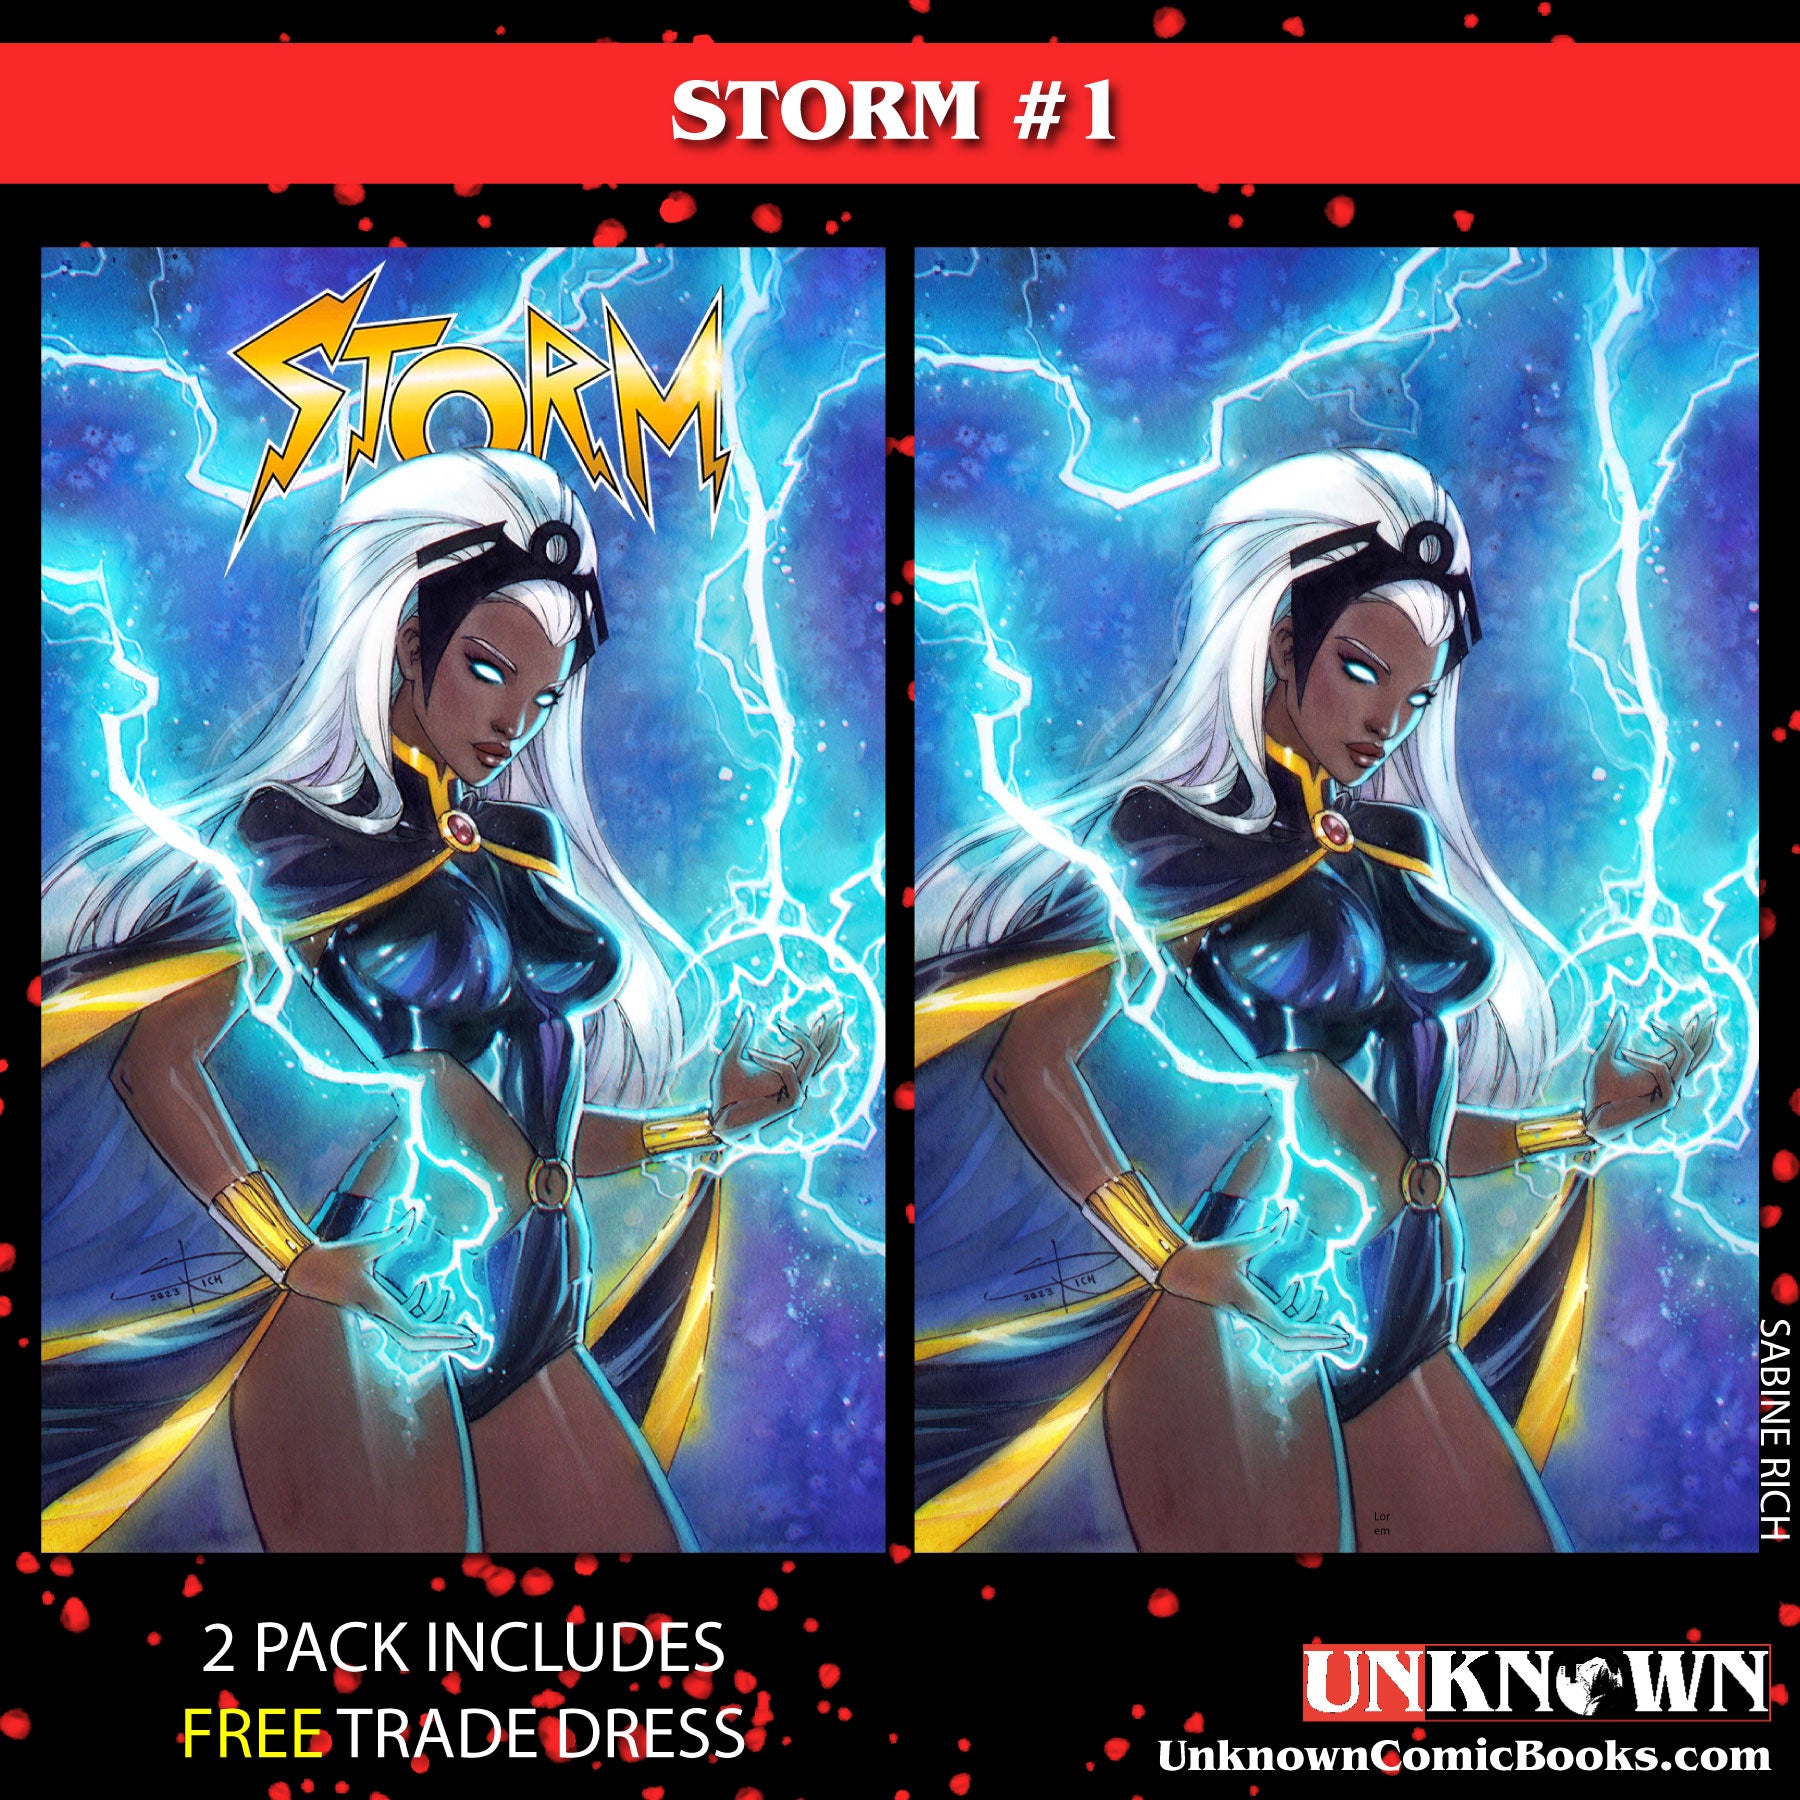 [2 PACK] **FREE TRADE DRESS** STORM #1 UNKNOWN COMICS SABINE RICH EXCLUSIVE VAR (05/24/2023)